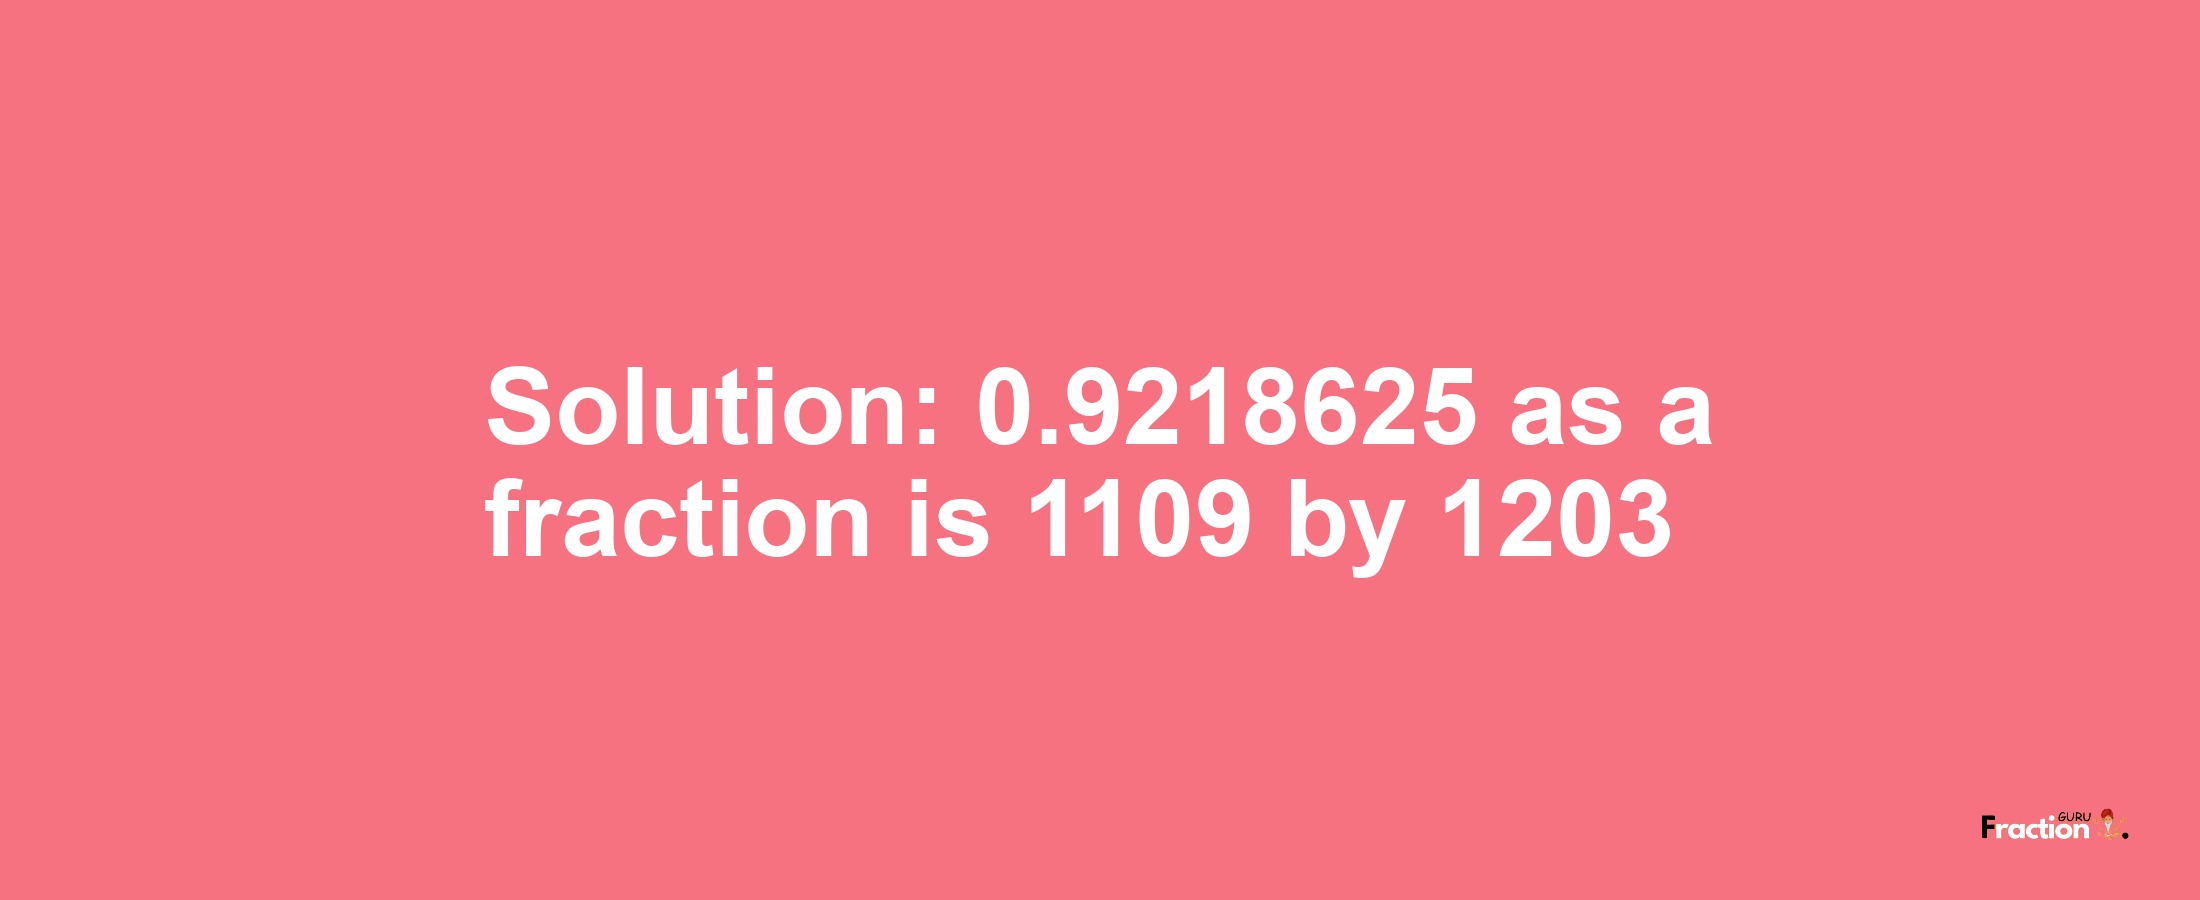 Solution:0.9218625 as a fraction is 1109/1203